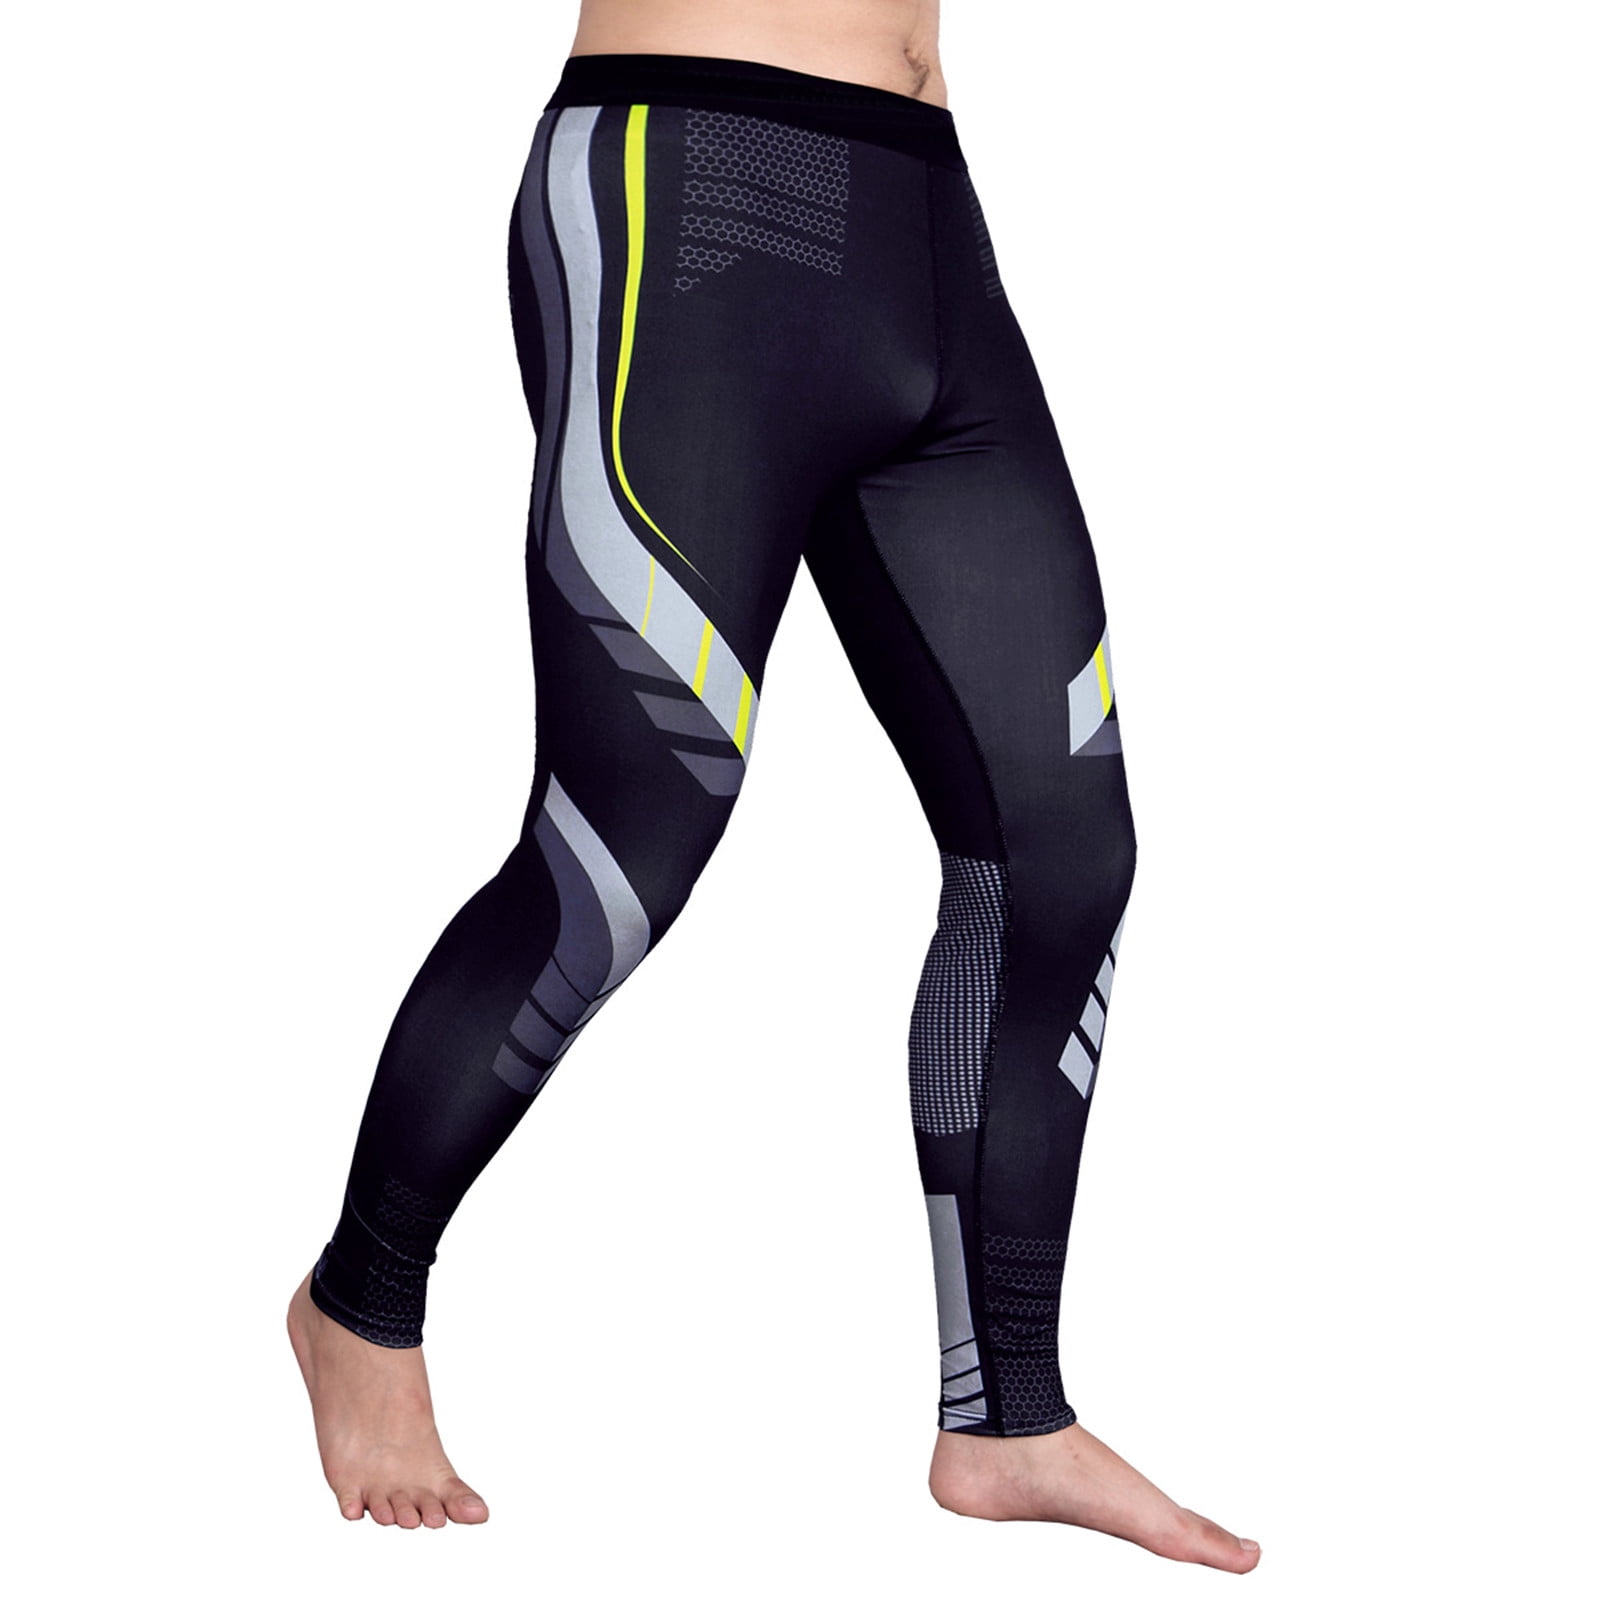 Men's Compression Pants Running Tights Workout Leggings, Cool Dry Technical  Sports Baselayer